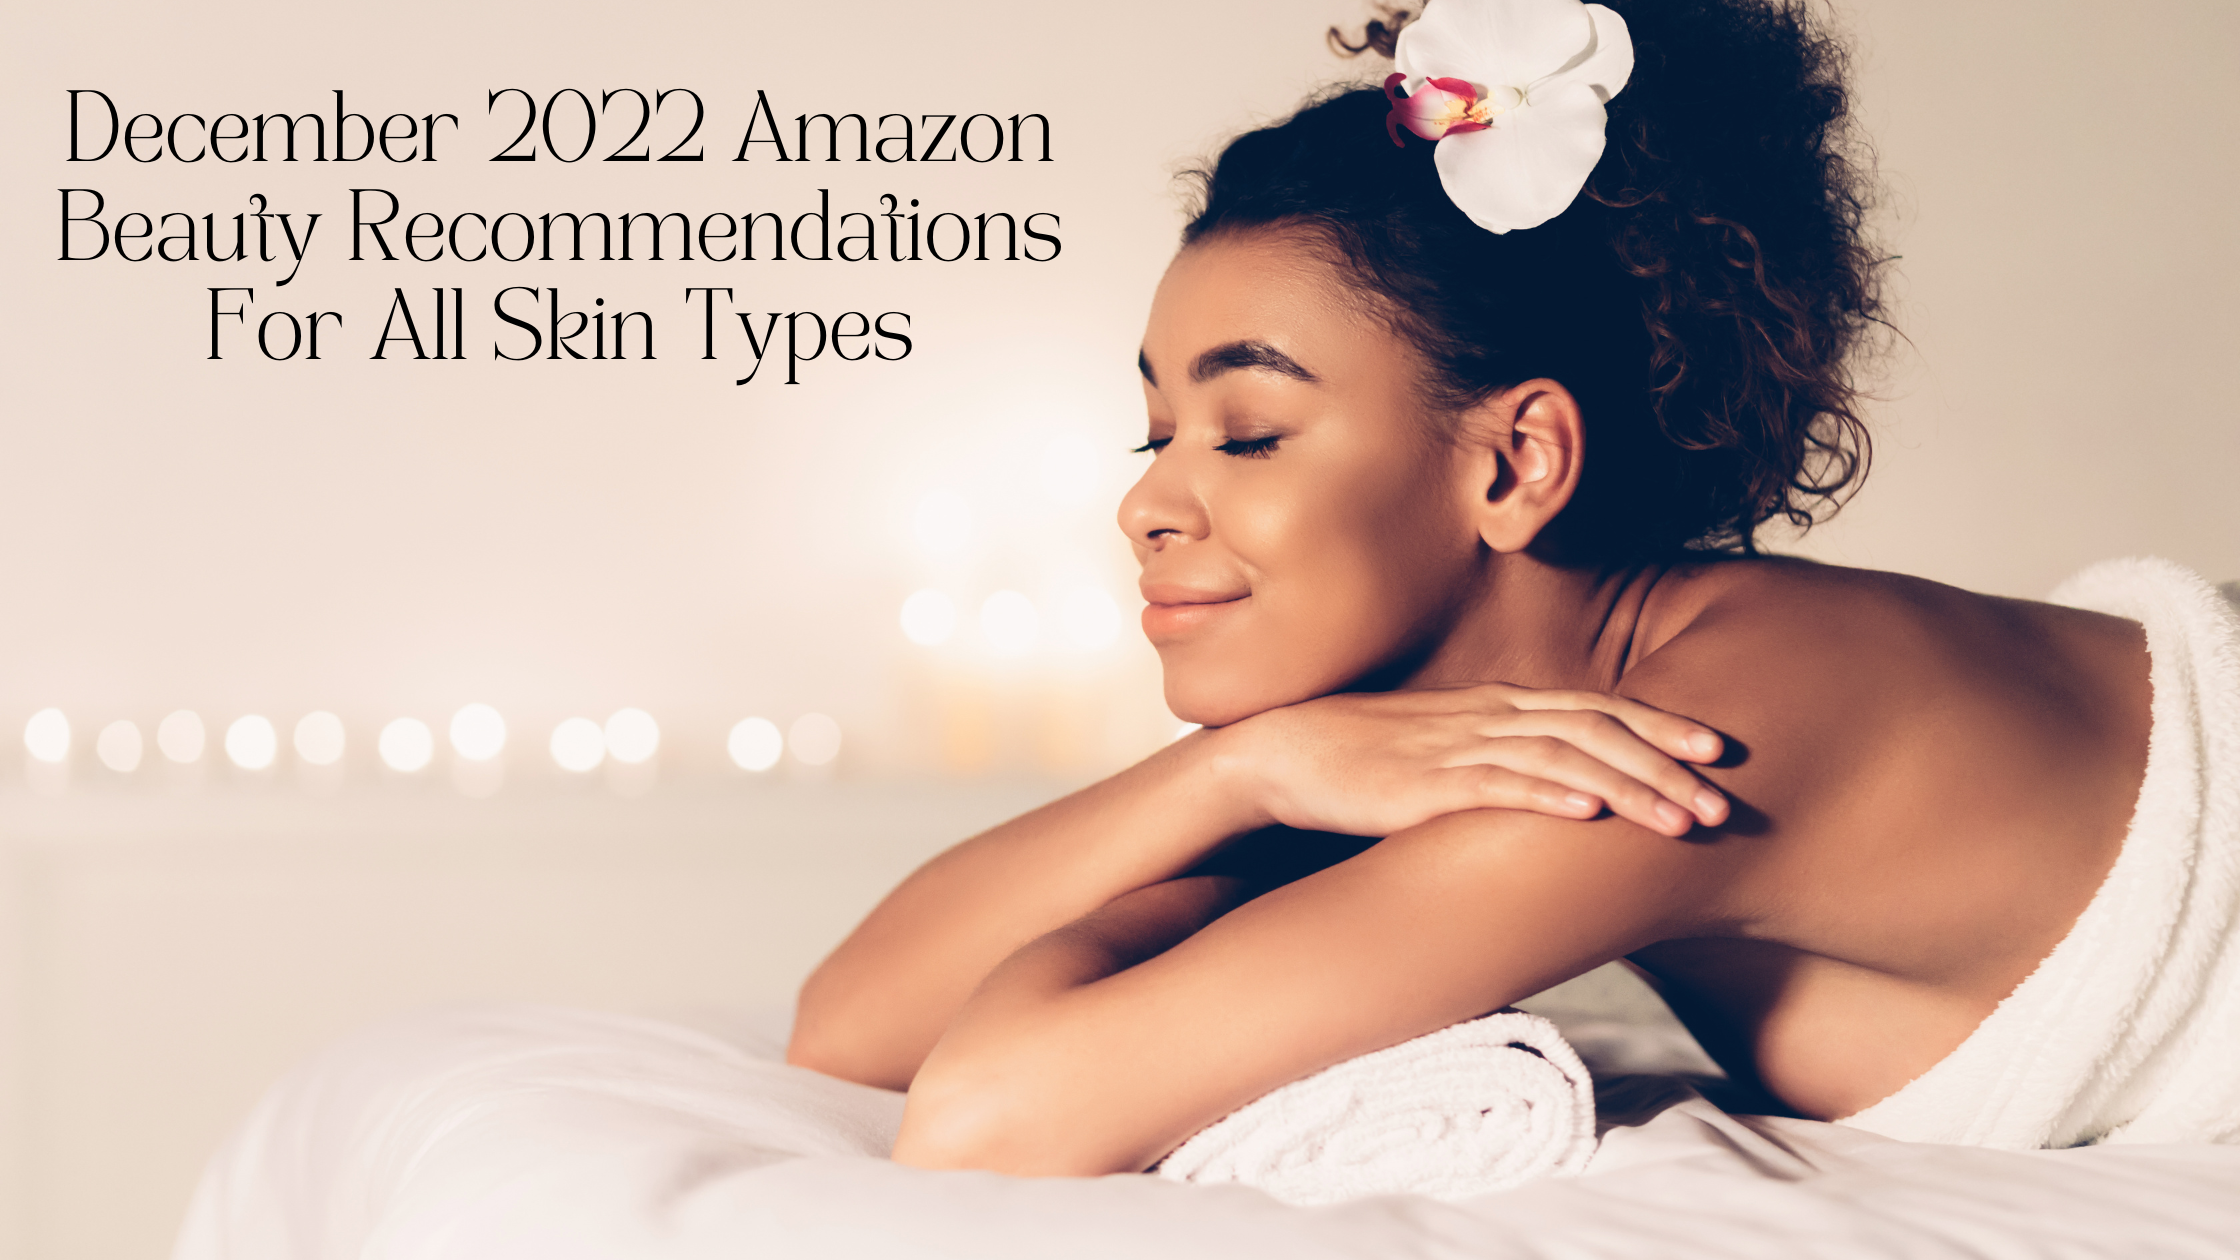 December 2022 Amazon Beauty Recommendations For All Skin Types